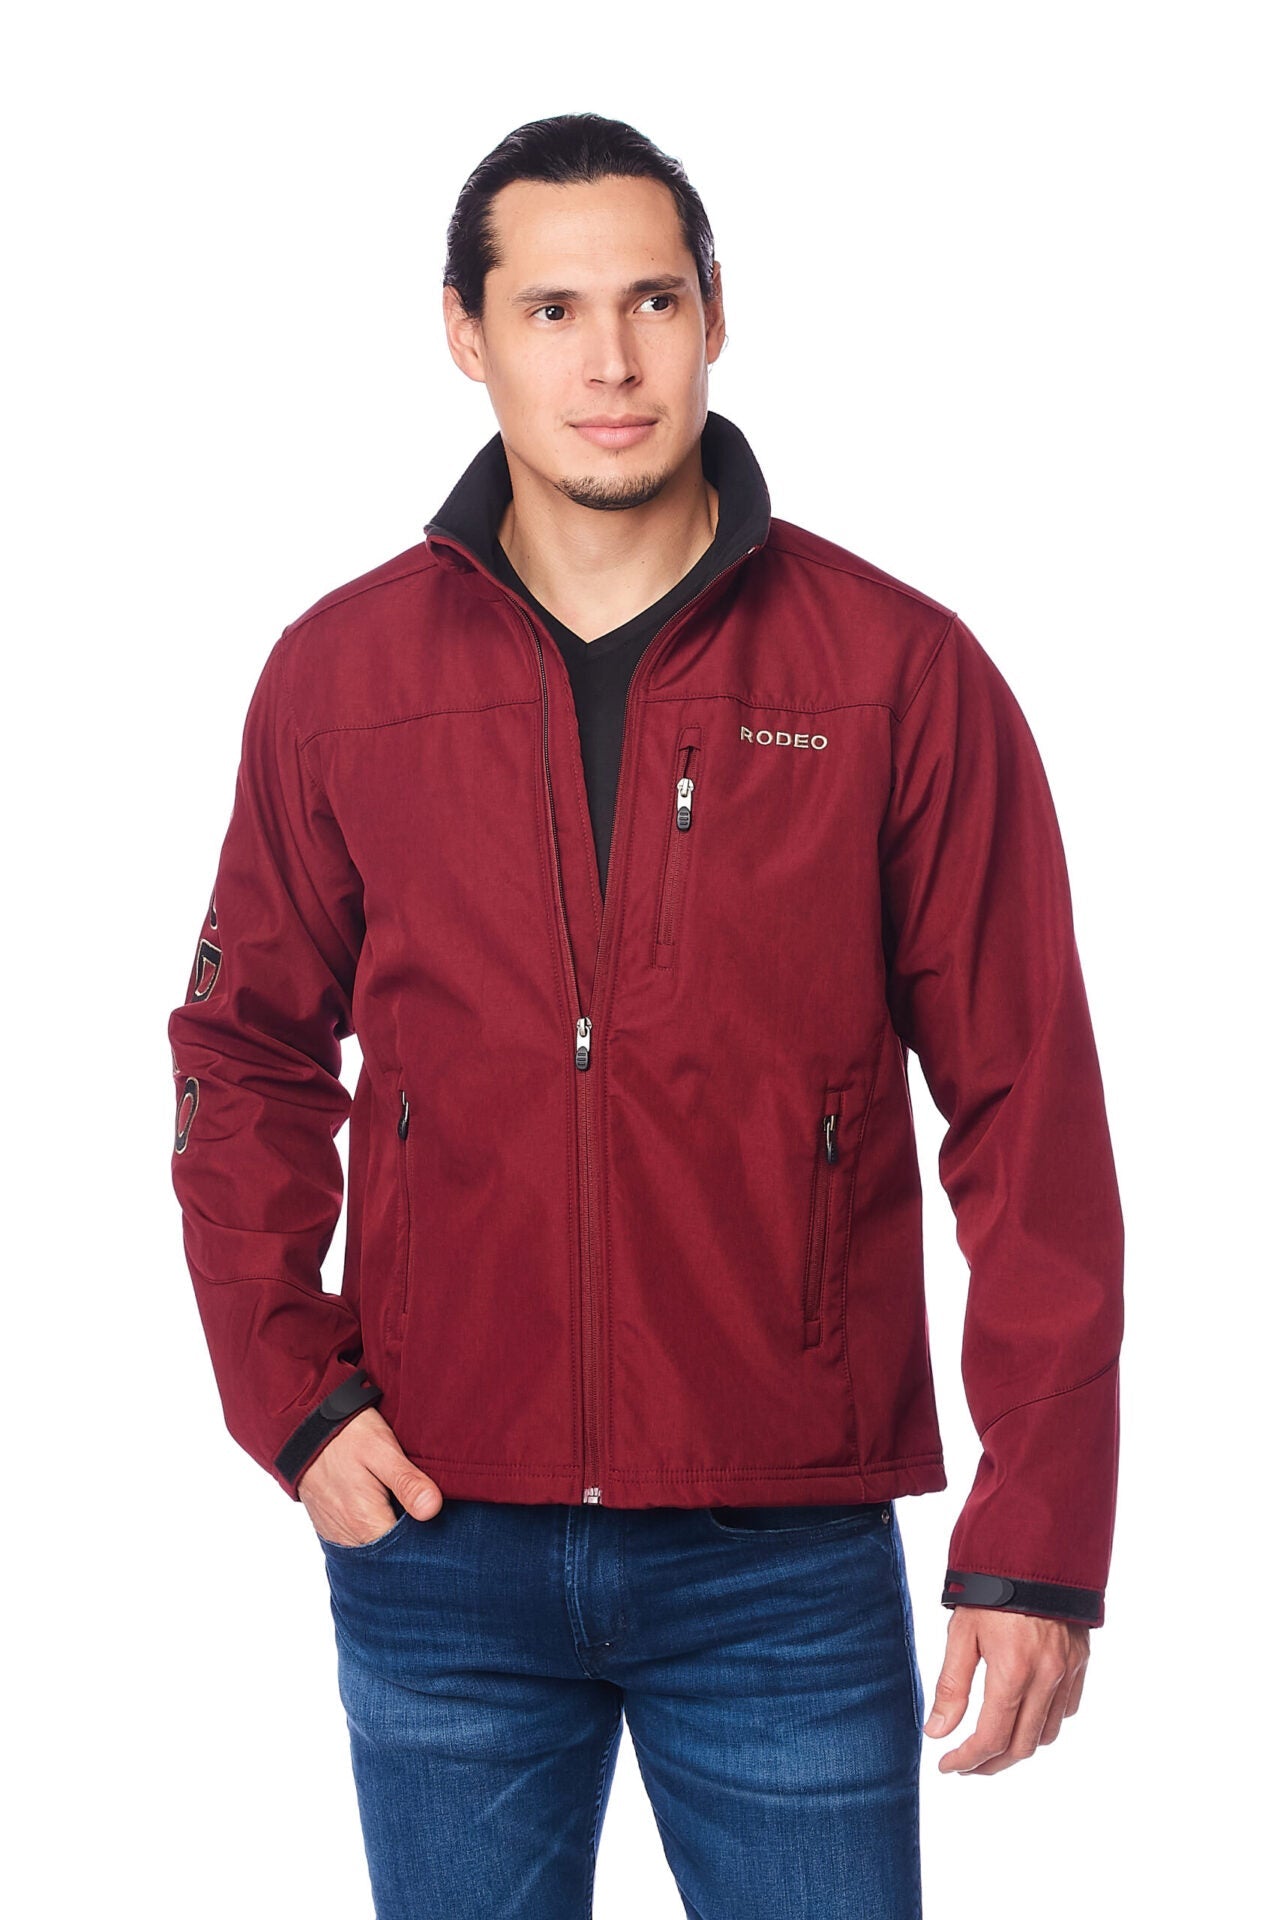  Men's High-Quality Soft Shell Bonded Jacket With Contrast Fleeceand Rodeo Embroidery-BURG-BLACK